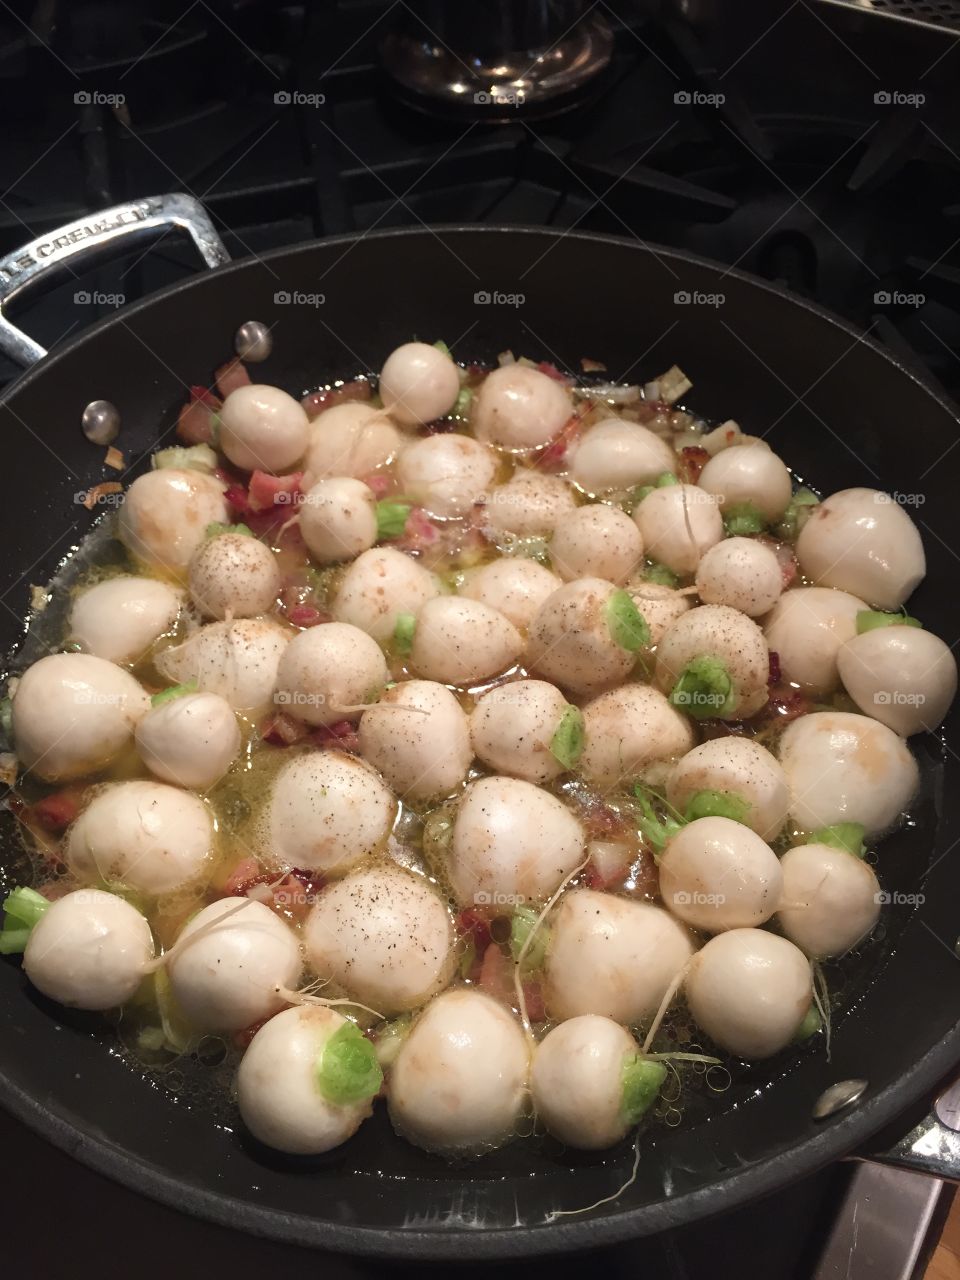 Braised turnips with bacon